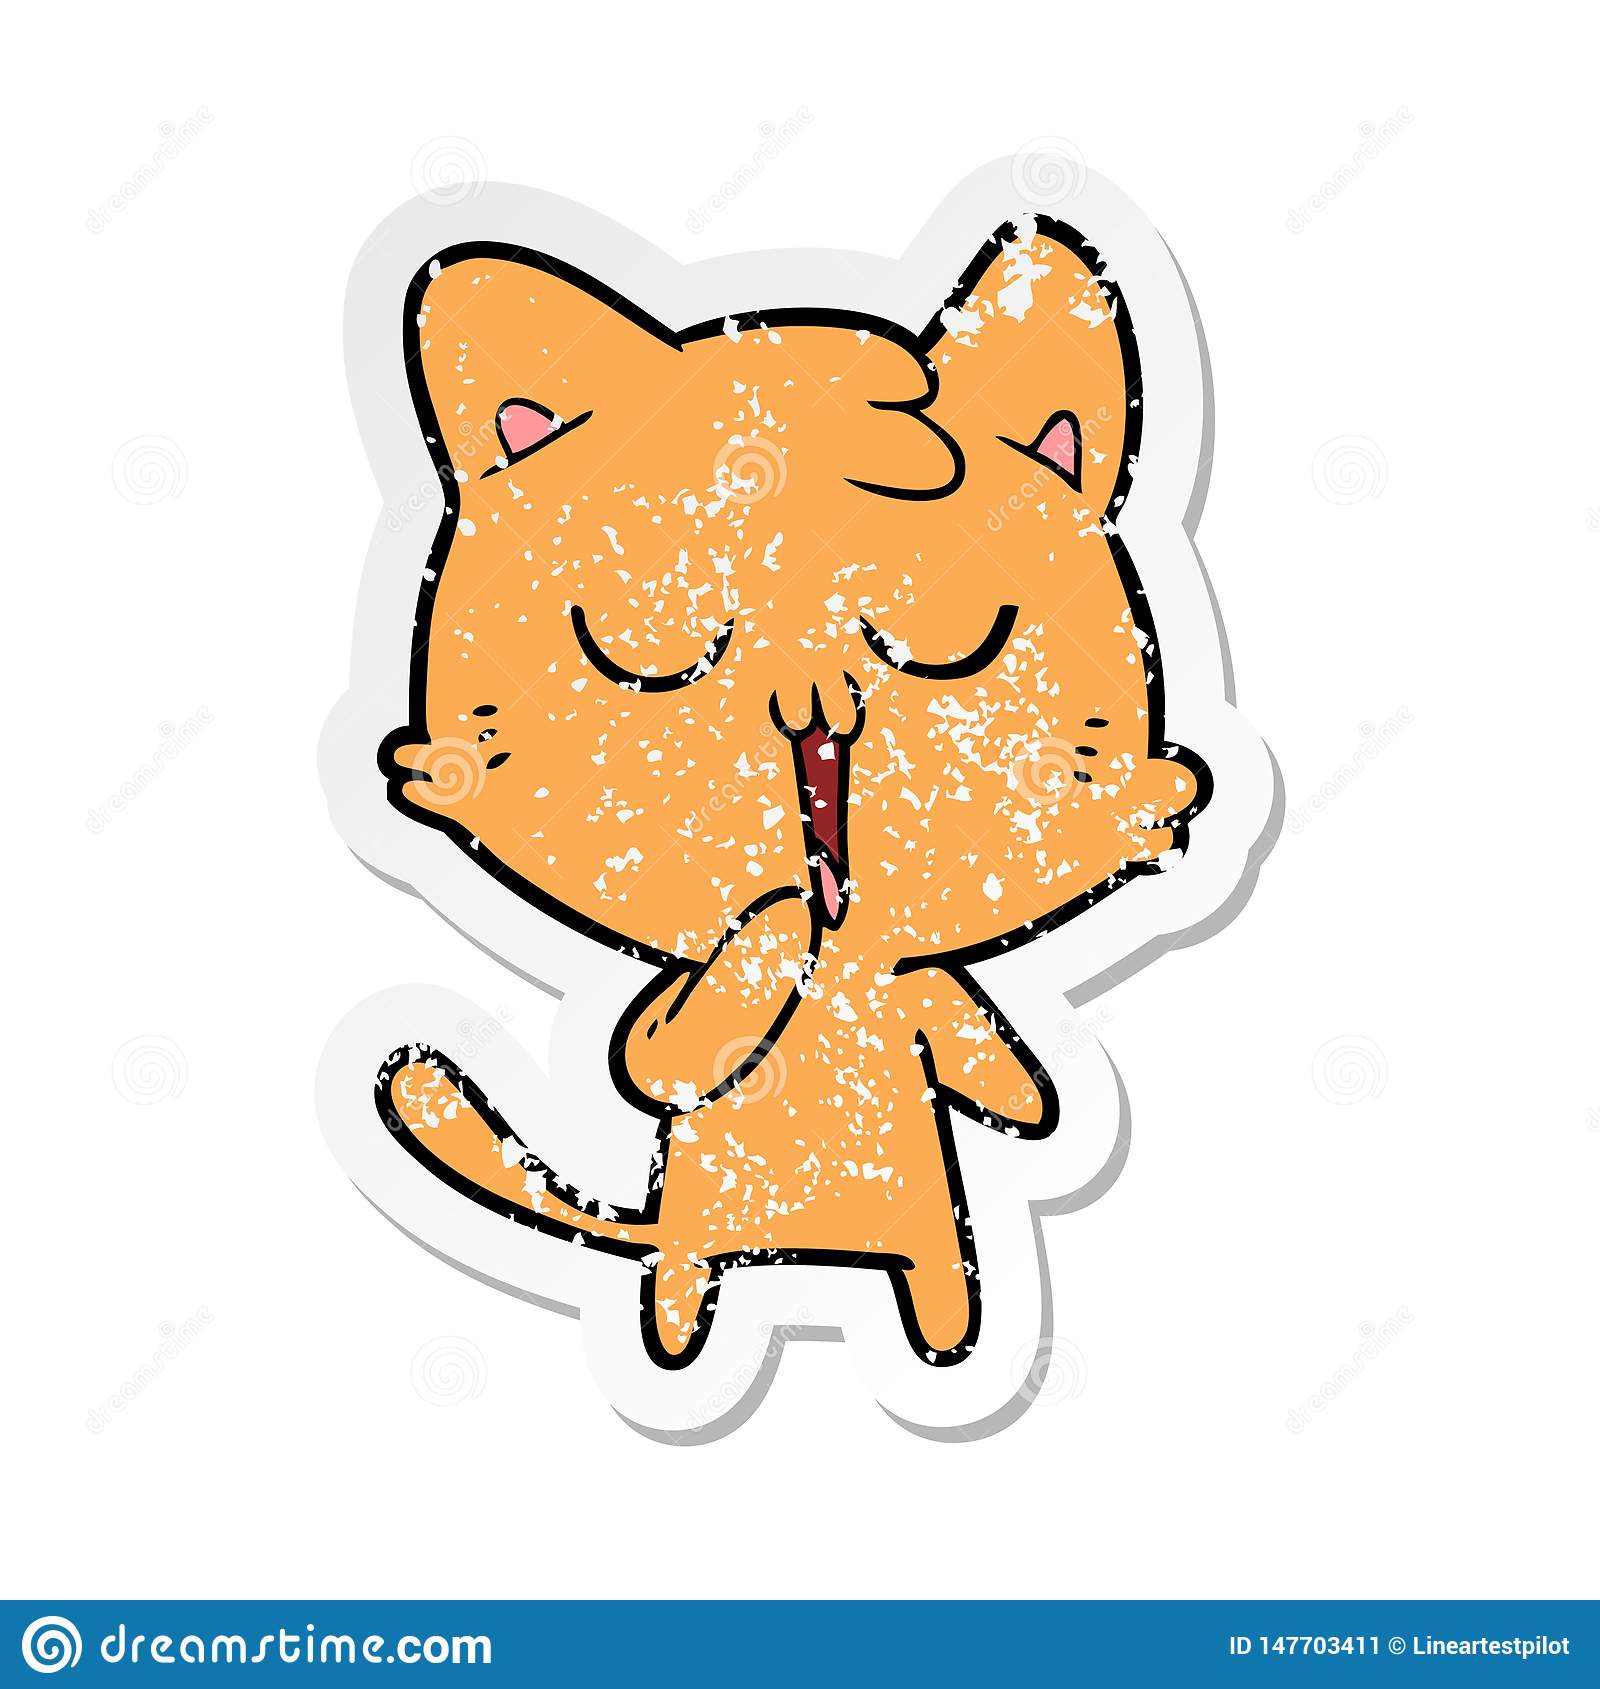 Distressed Sticker Of A Cartoon Cat Yawning Stock Vector